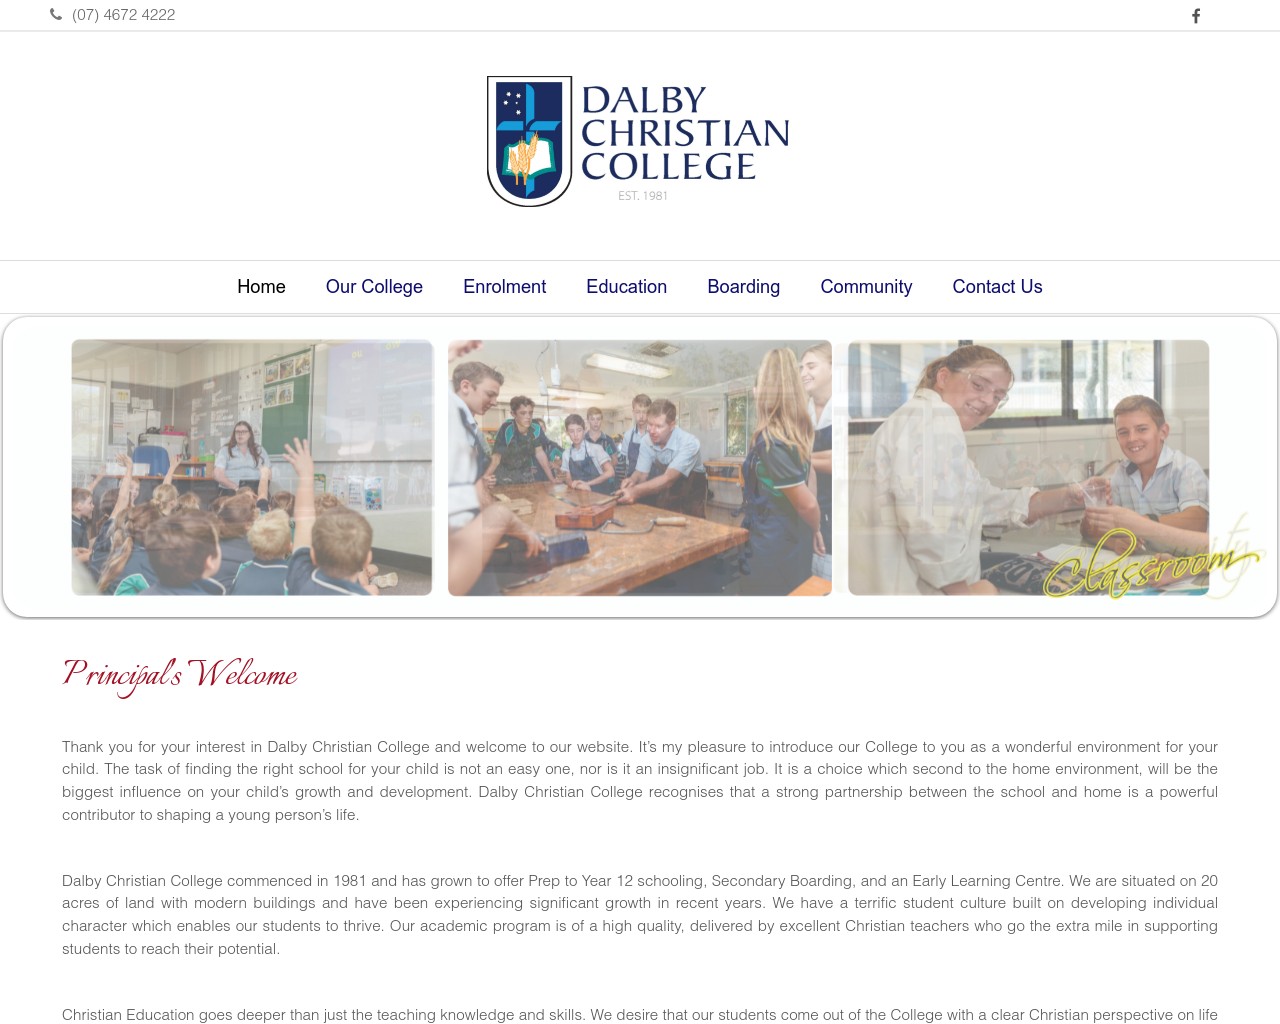 Dalby Christian College